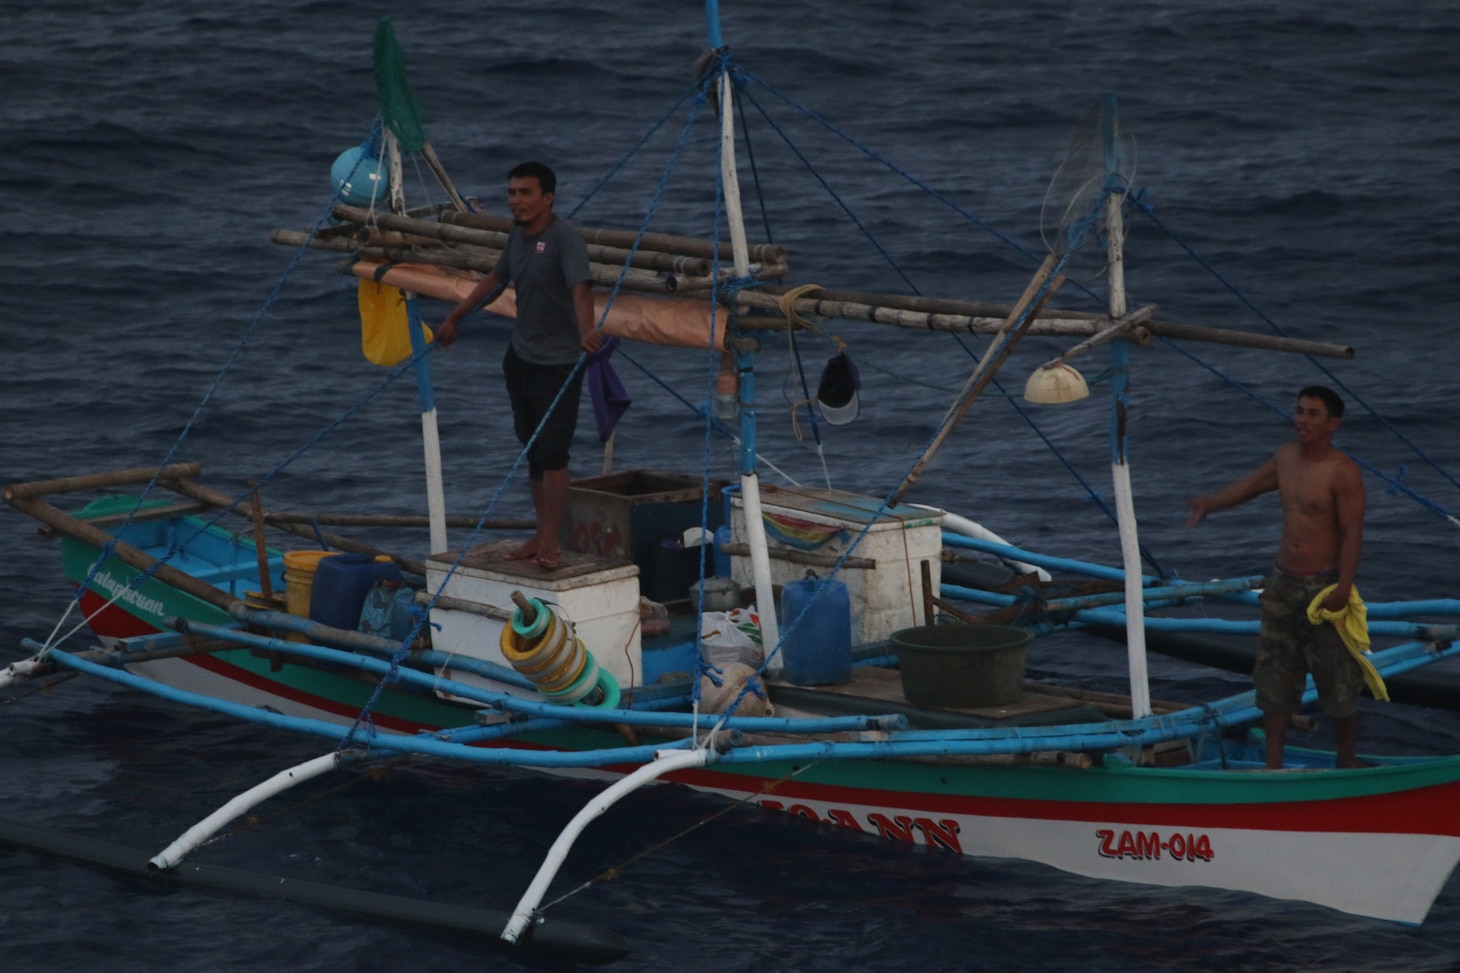 Two Filipino fishermen signal they are in distress to Sailors from USS Mustin (DDG 89) after their fishing boat was disabled in the South China Sea.  Mustin used their Rigid Hull Inflatable Boat (RHIB) to tow the adrift fishing vessel to rejoin their fellow fishermen. Mustin is forward-deployed to the U.S. 7th Fleet area of operations in support of security and stability in the Indo-Pacific region.